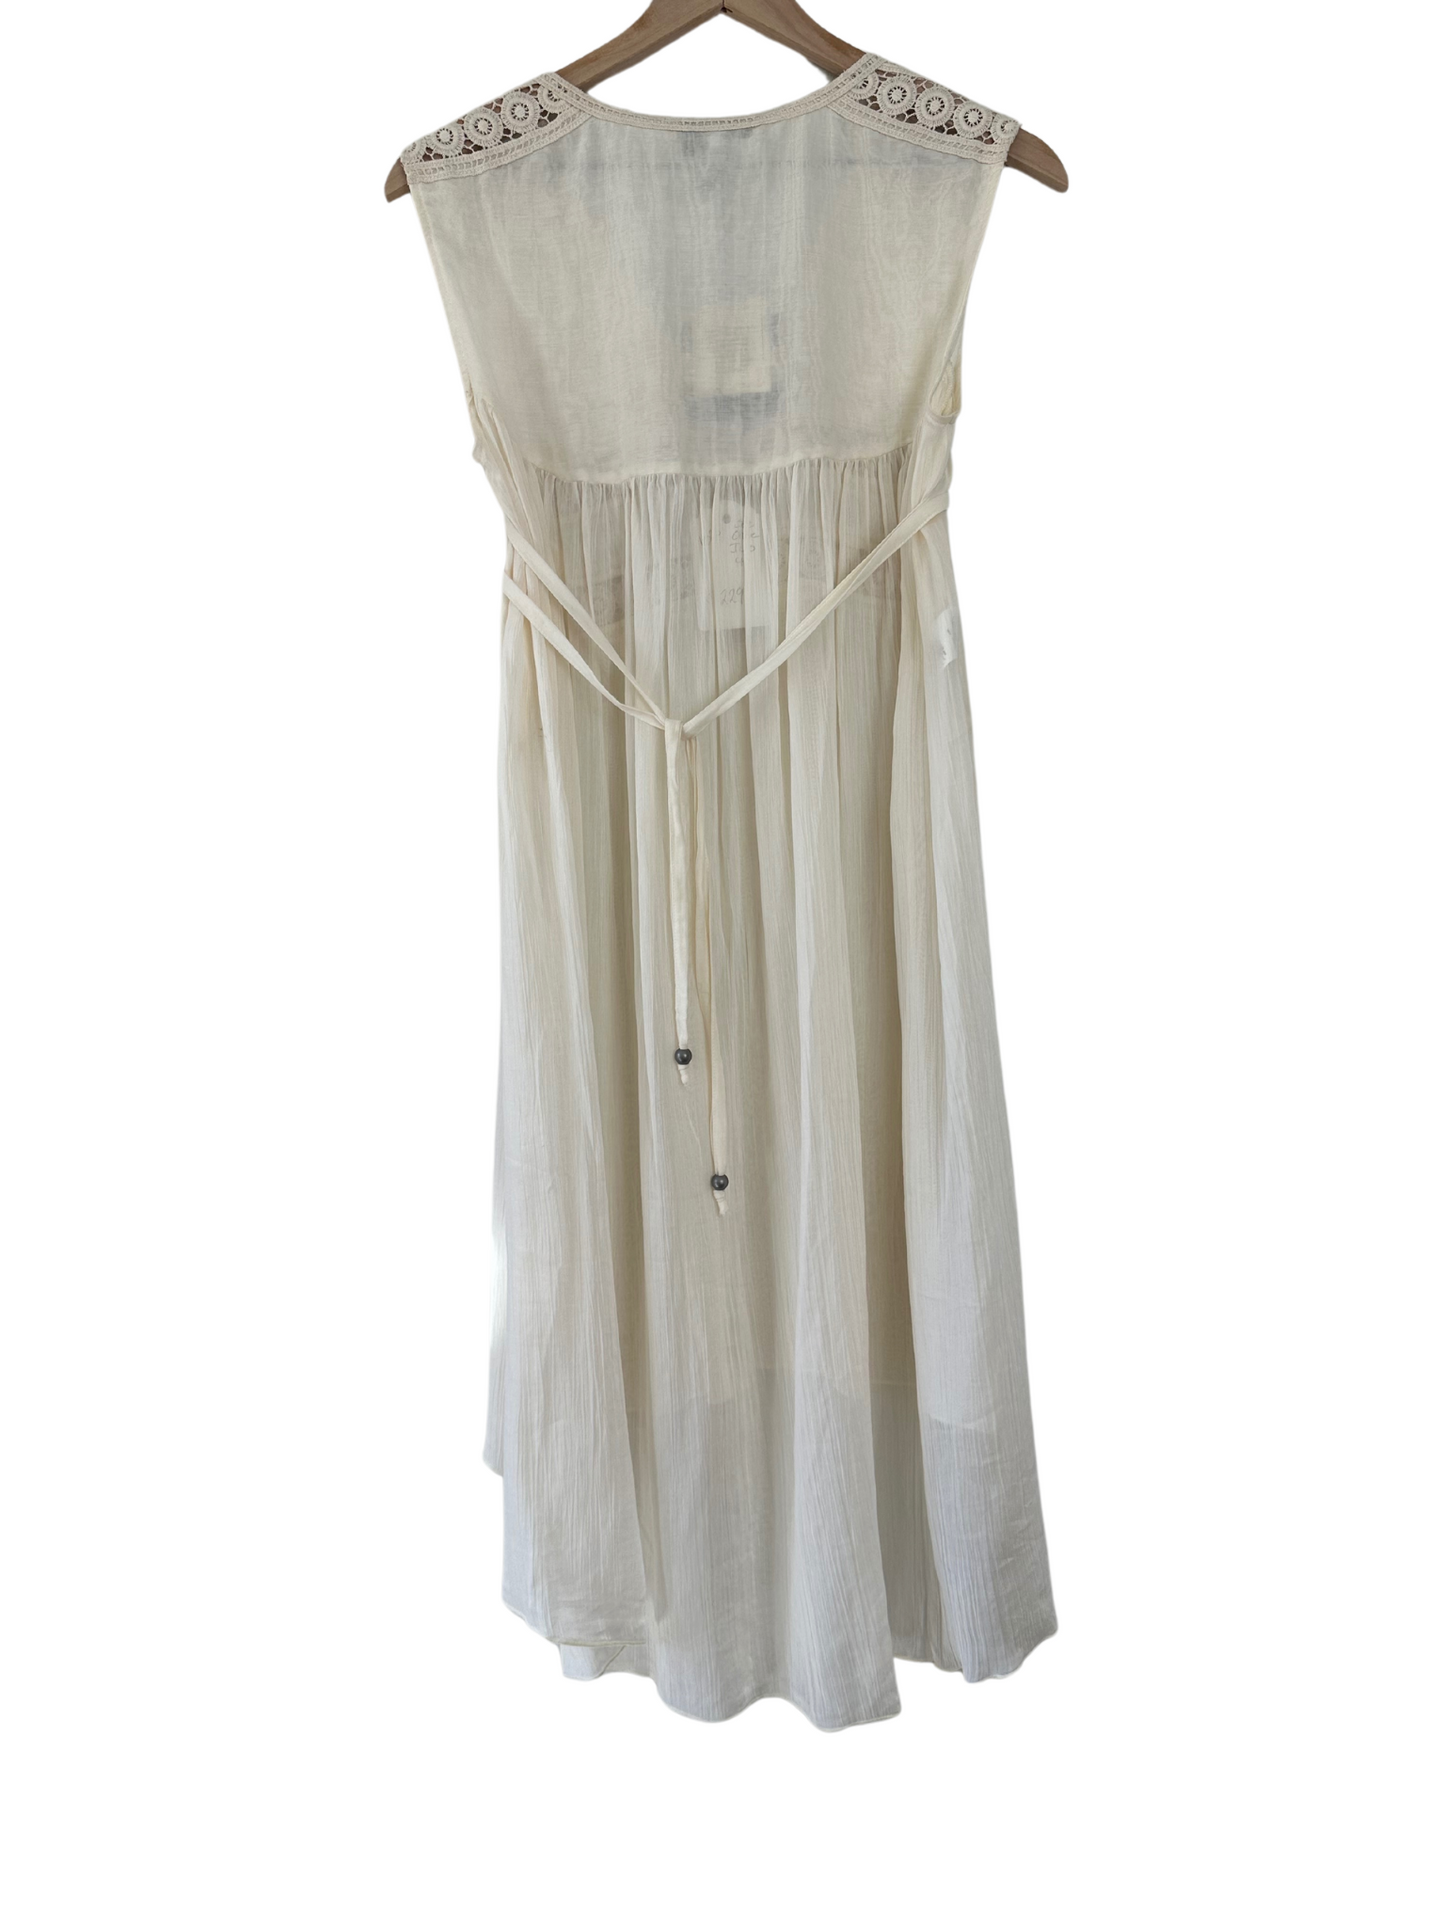 See by Chloé Cream Cotton and Silk Crepe High Low Dress Size 40, US 4